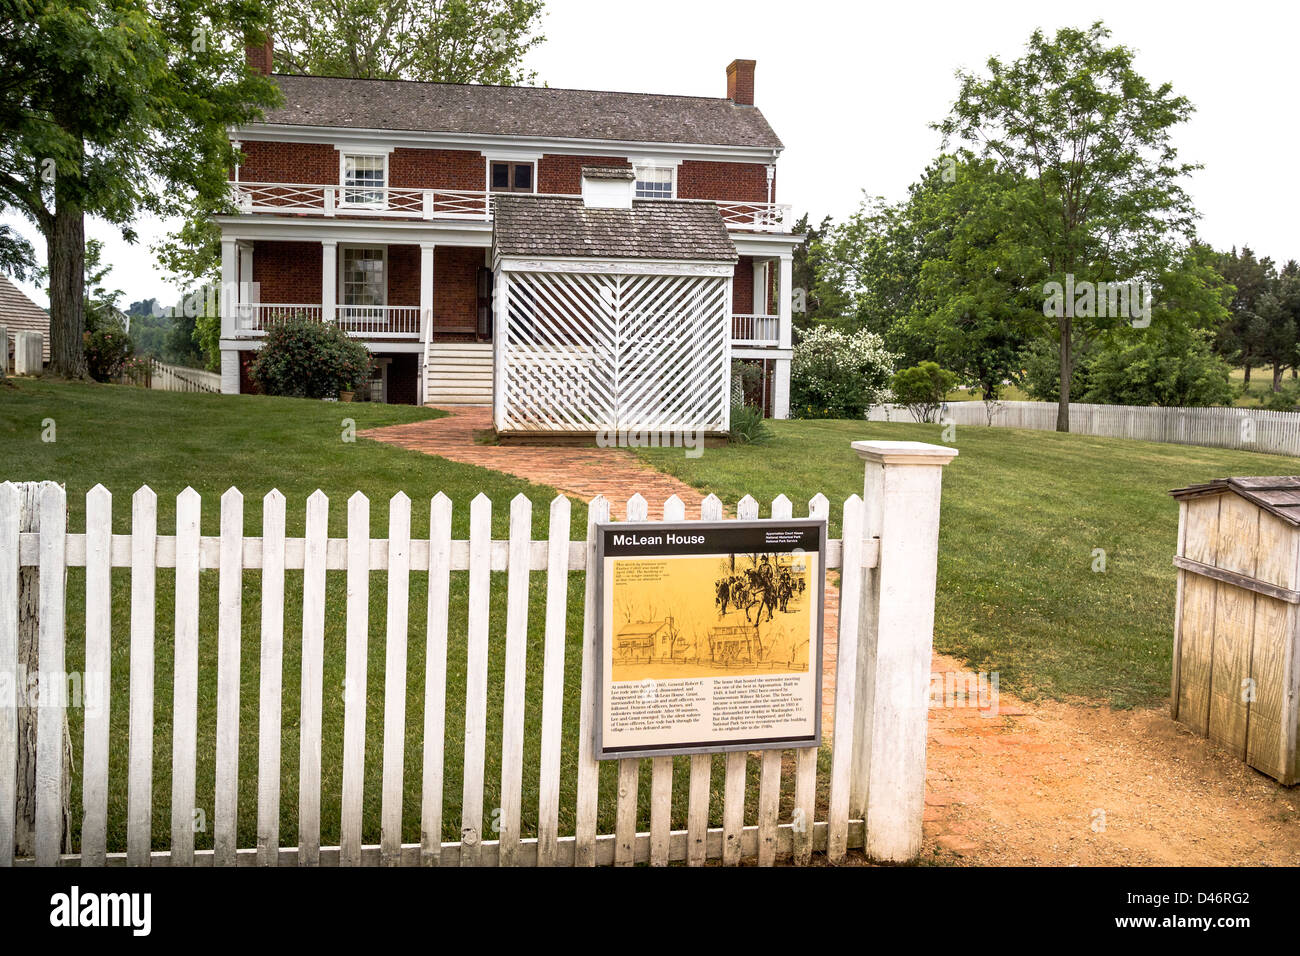 A National Park Service sign describes the historic McLean House near Appomattox, Virginia, USA, where the U.S. Civil War officially ended in 1865. Stock Photo